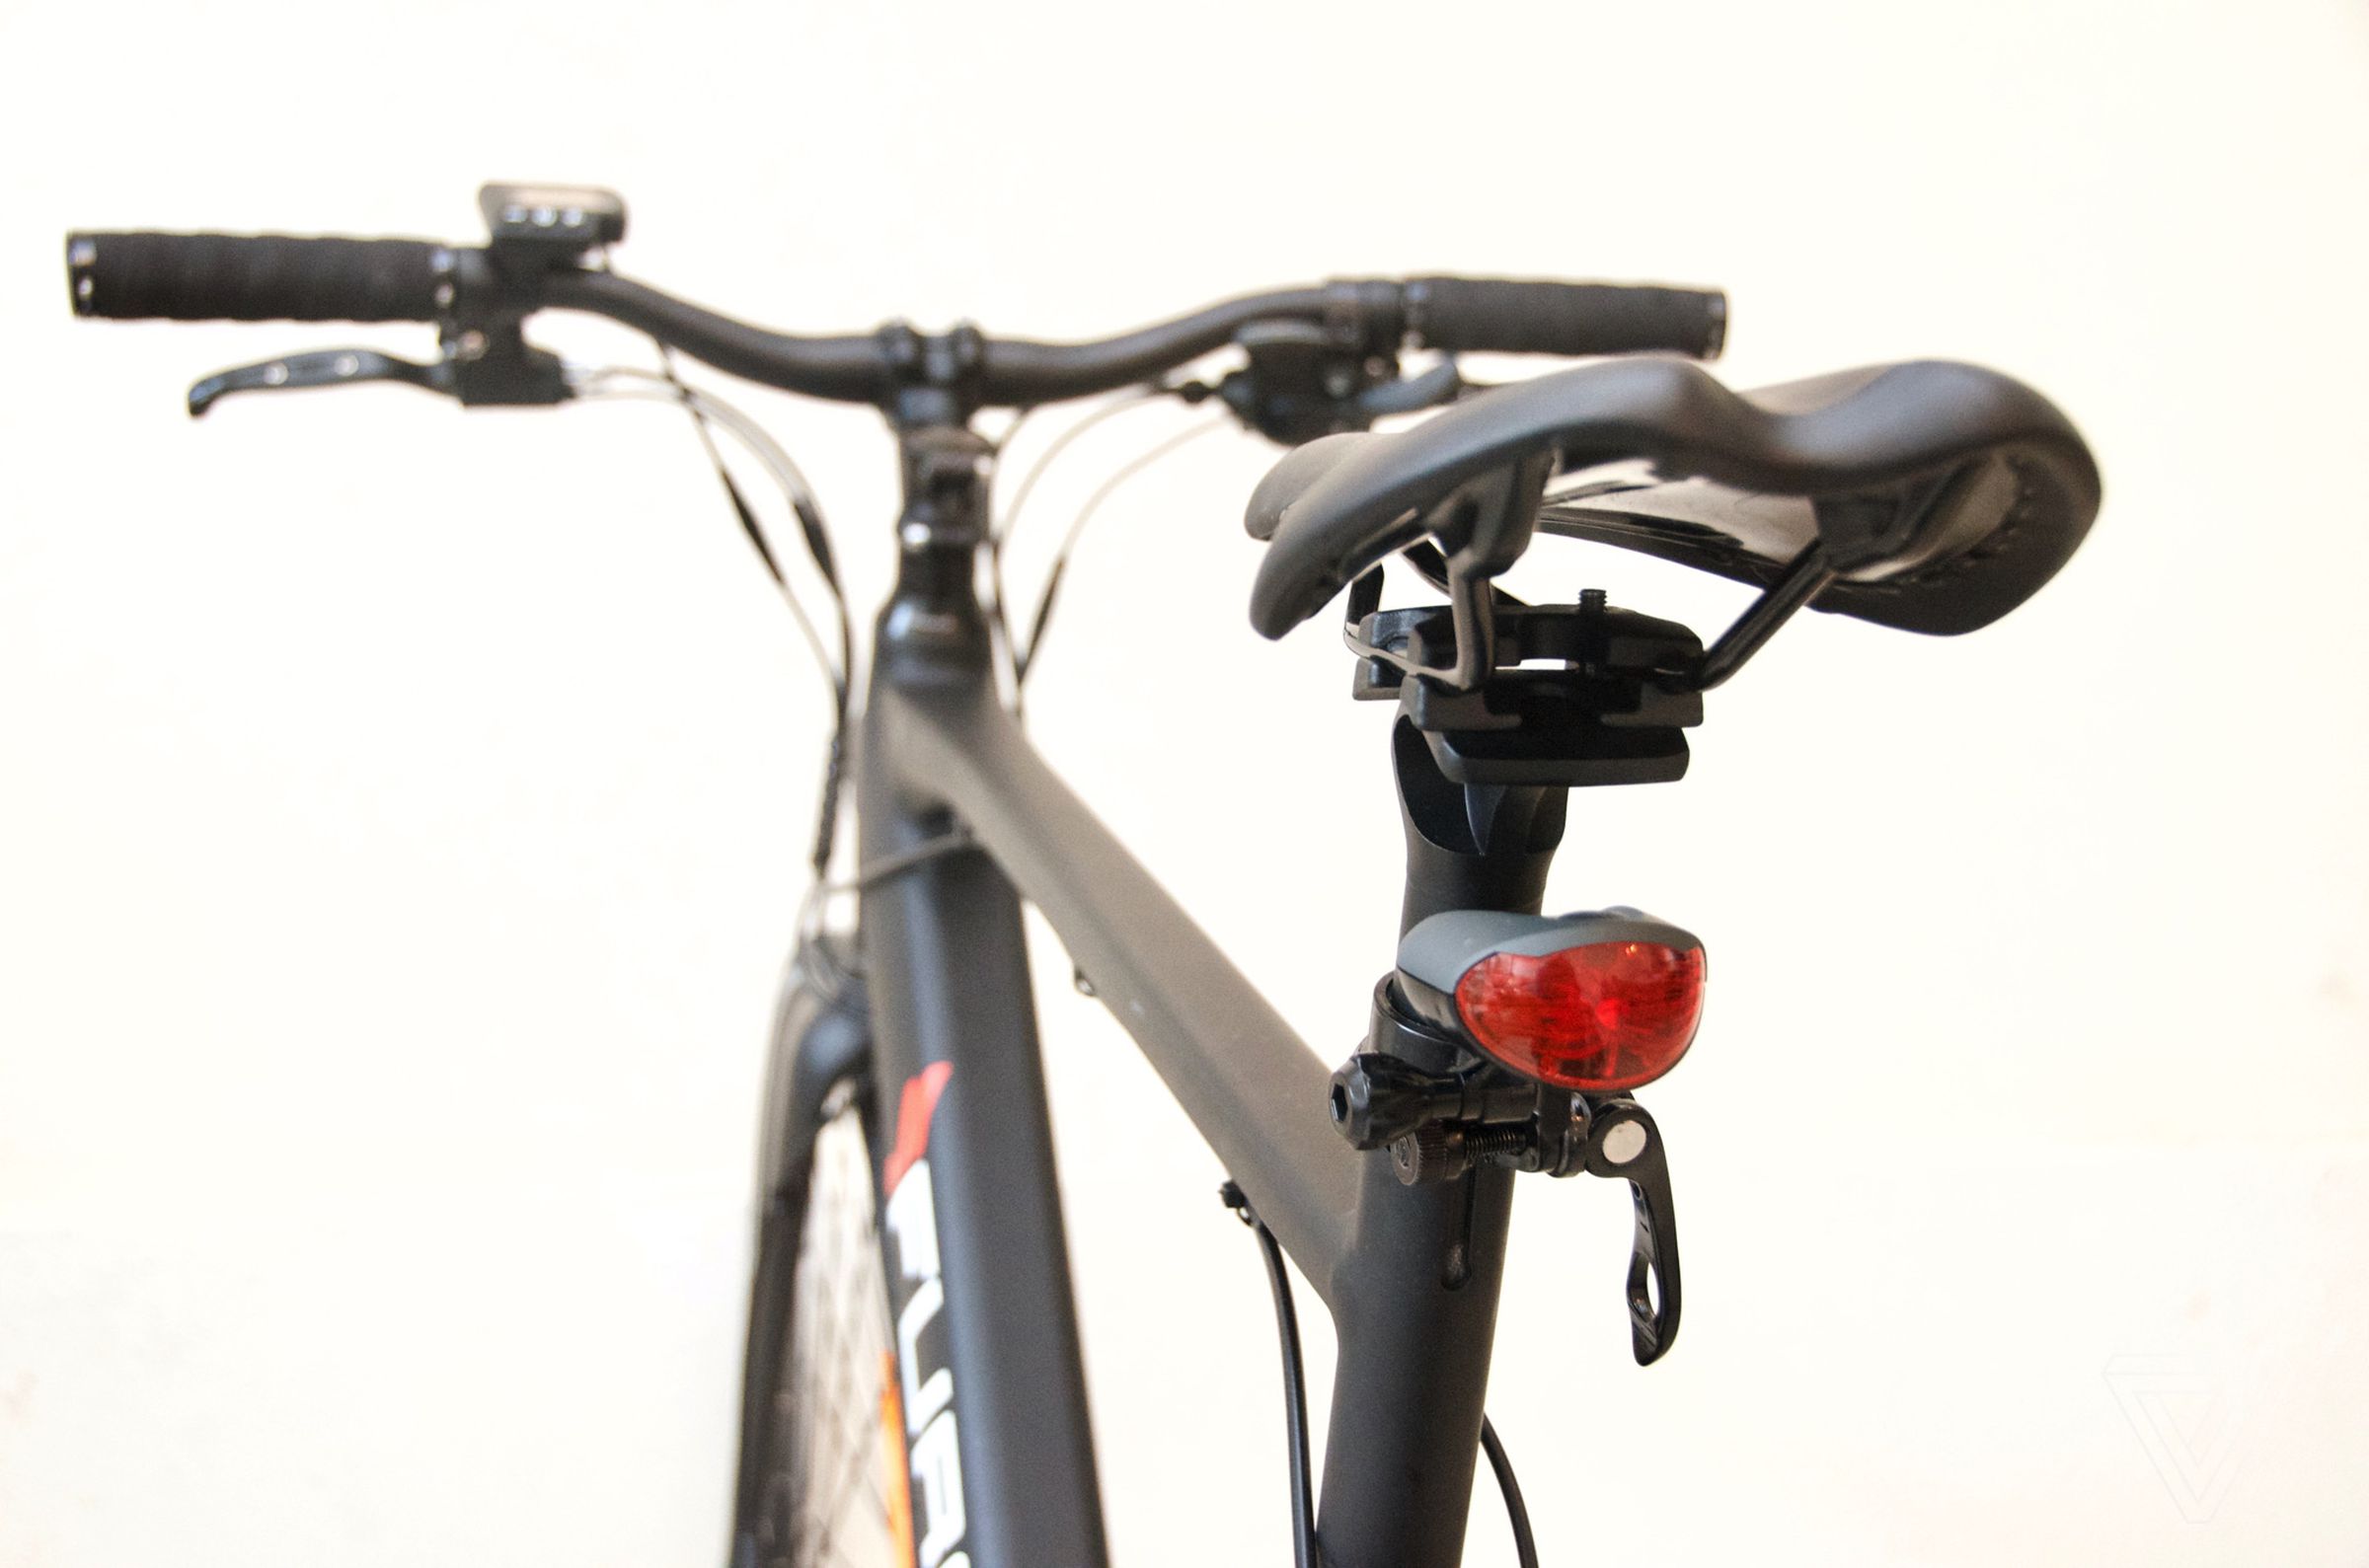 The clamp-on rear lamp and quick-release saddle stem.